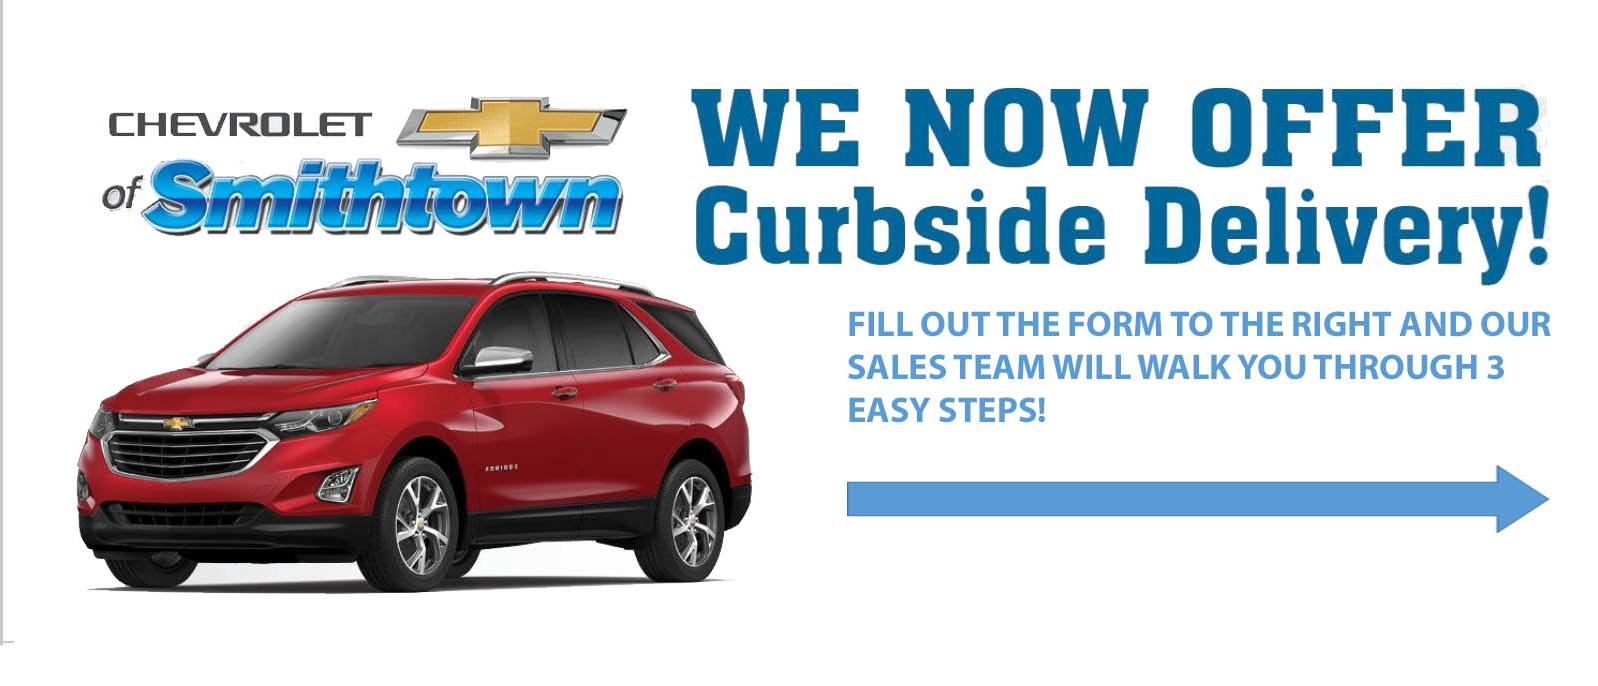 Curbside delivery at Chevrolet of Smithtown